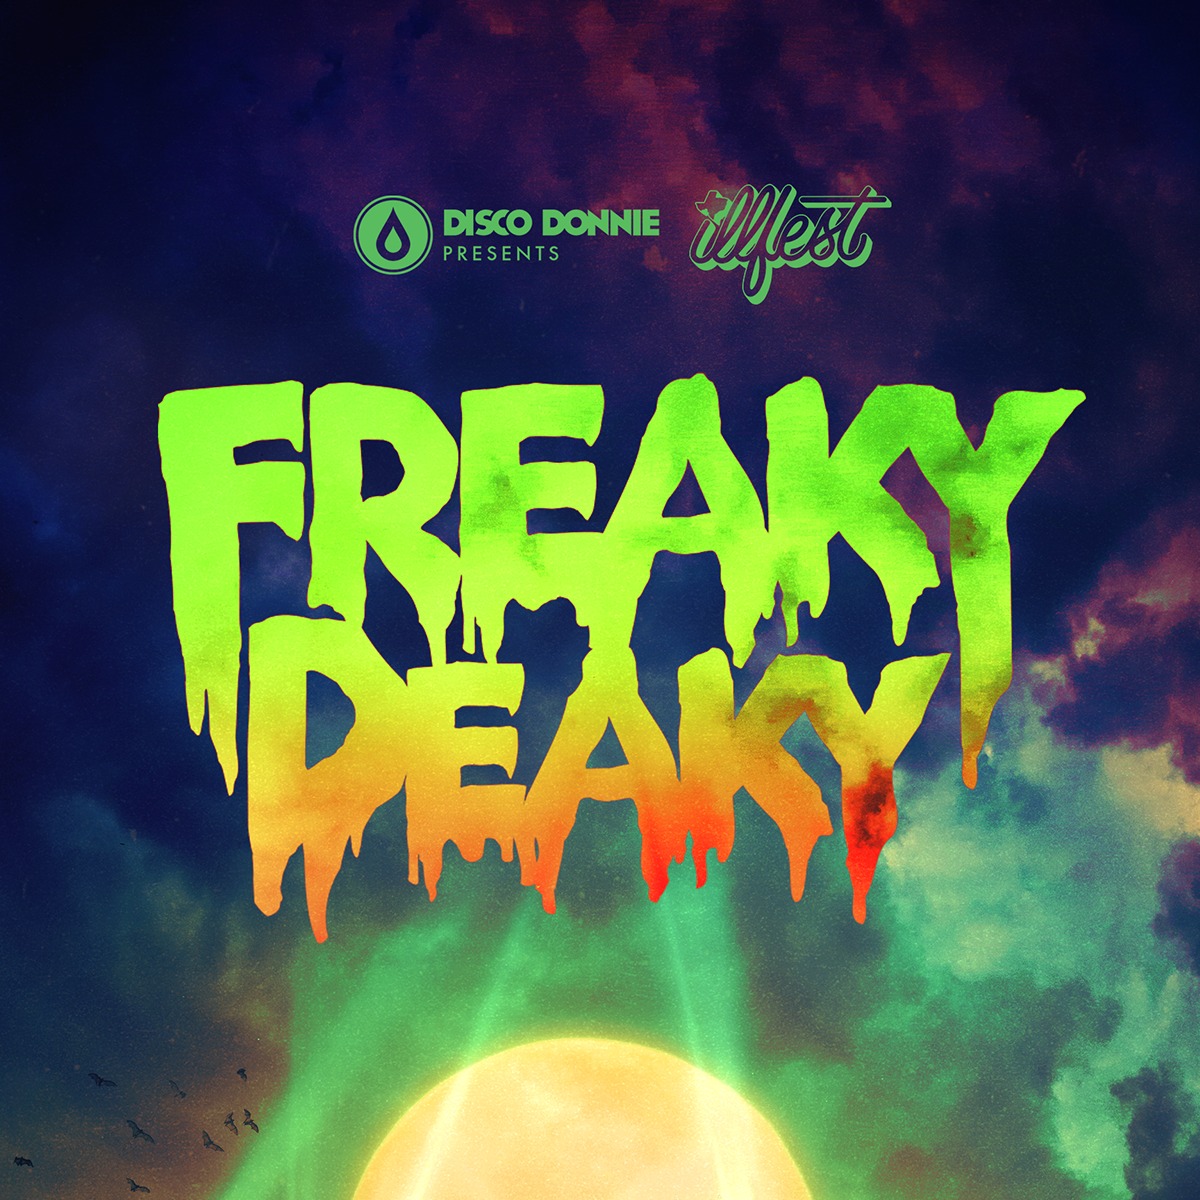 Buy Tickets to Freaky Deaky 2023 (EXTRAS) in Austin on Oct 28, 2023